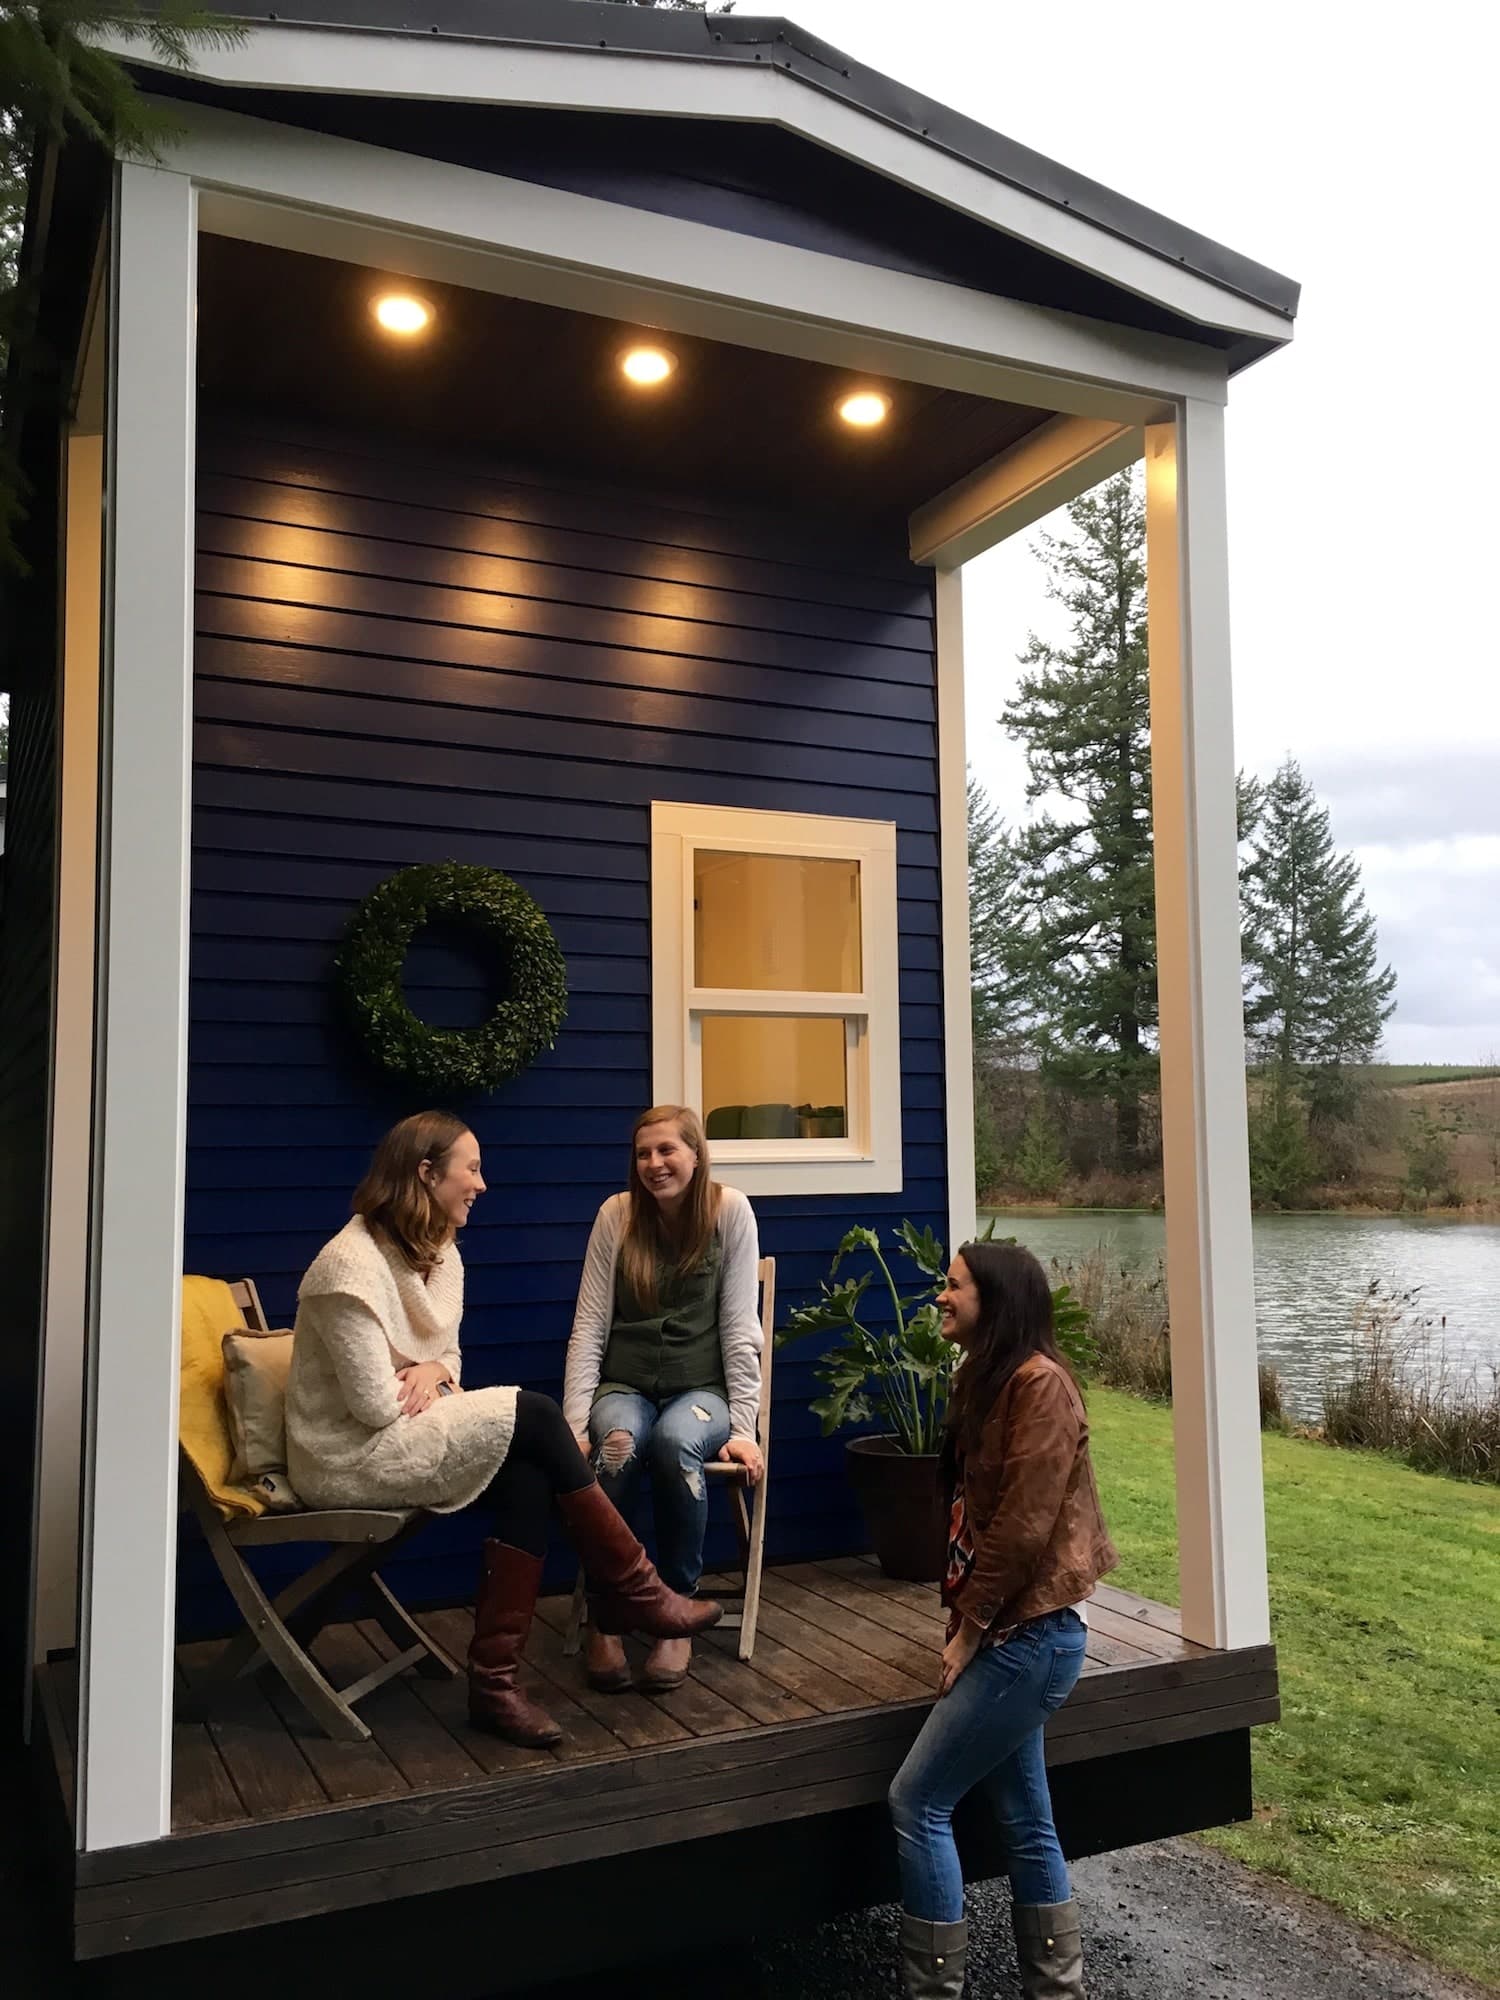 People socializing on the porch of the Vintage Glam custom tiny home